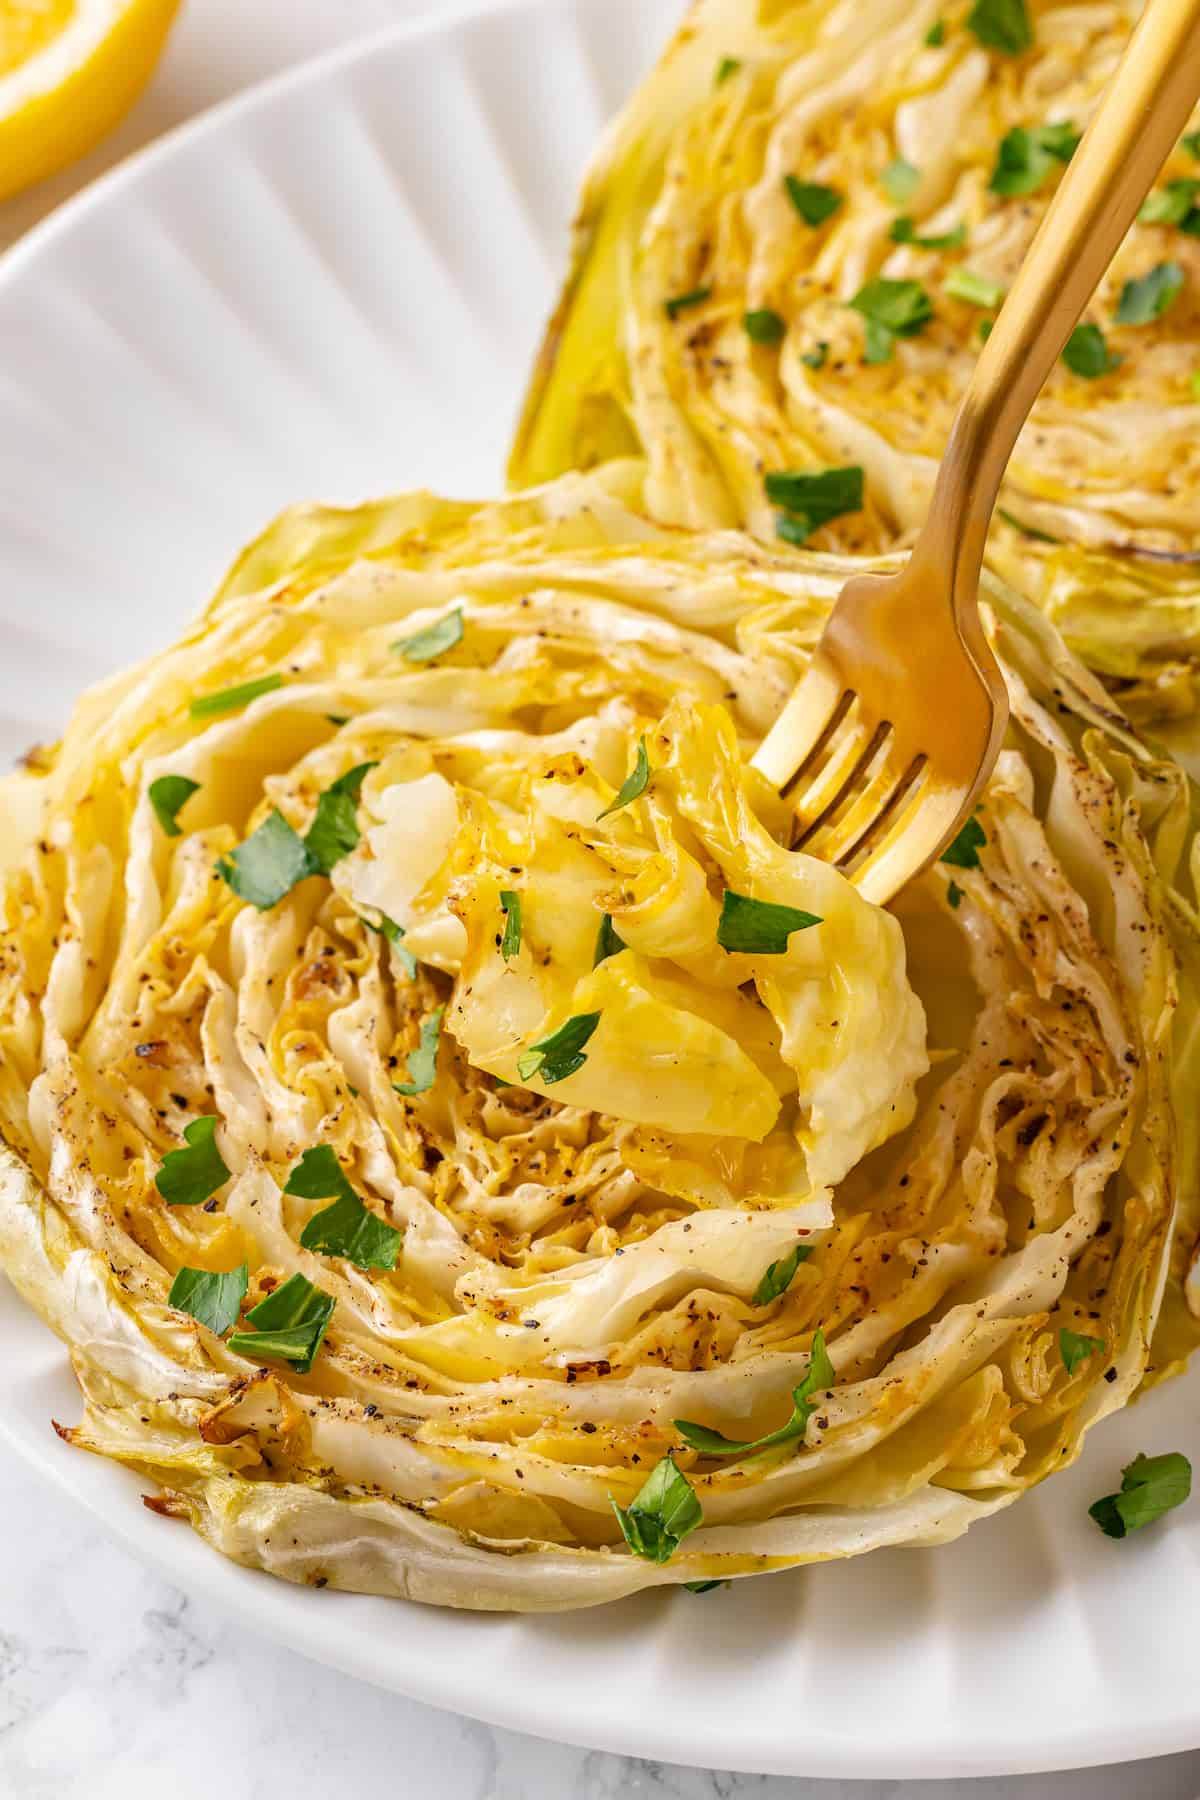 Two cabbage steaks on plate with gold fork